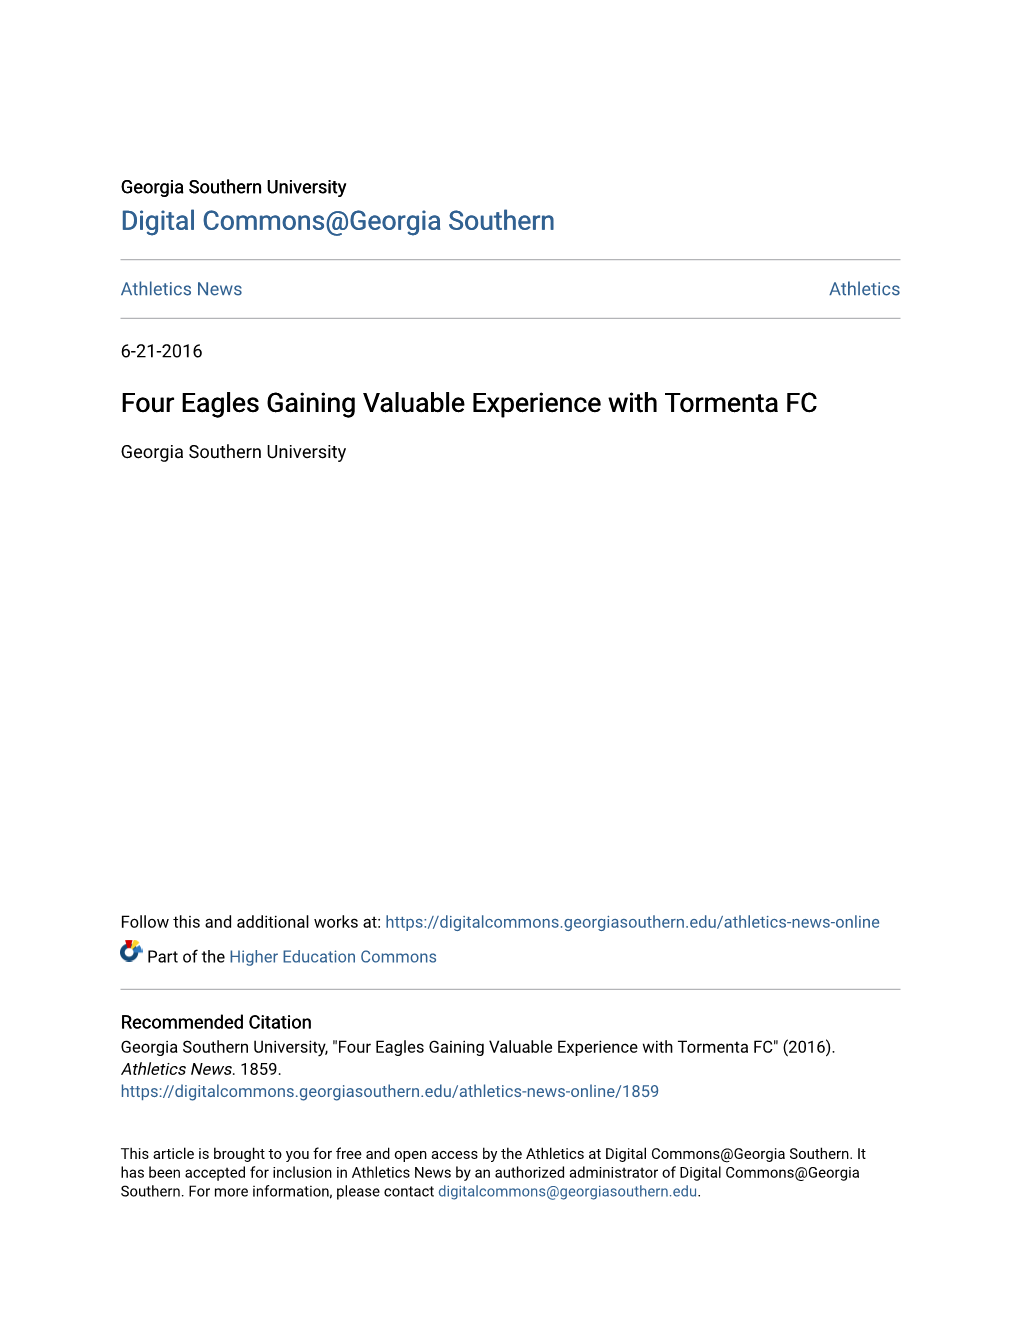 Four Eagles Gaining Valuable Experience with Tormenta FC